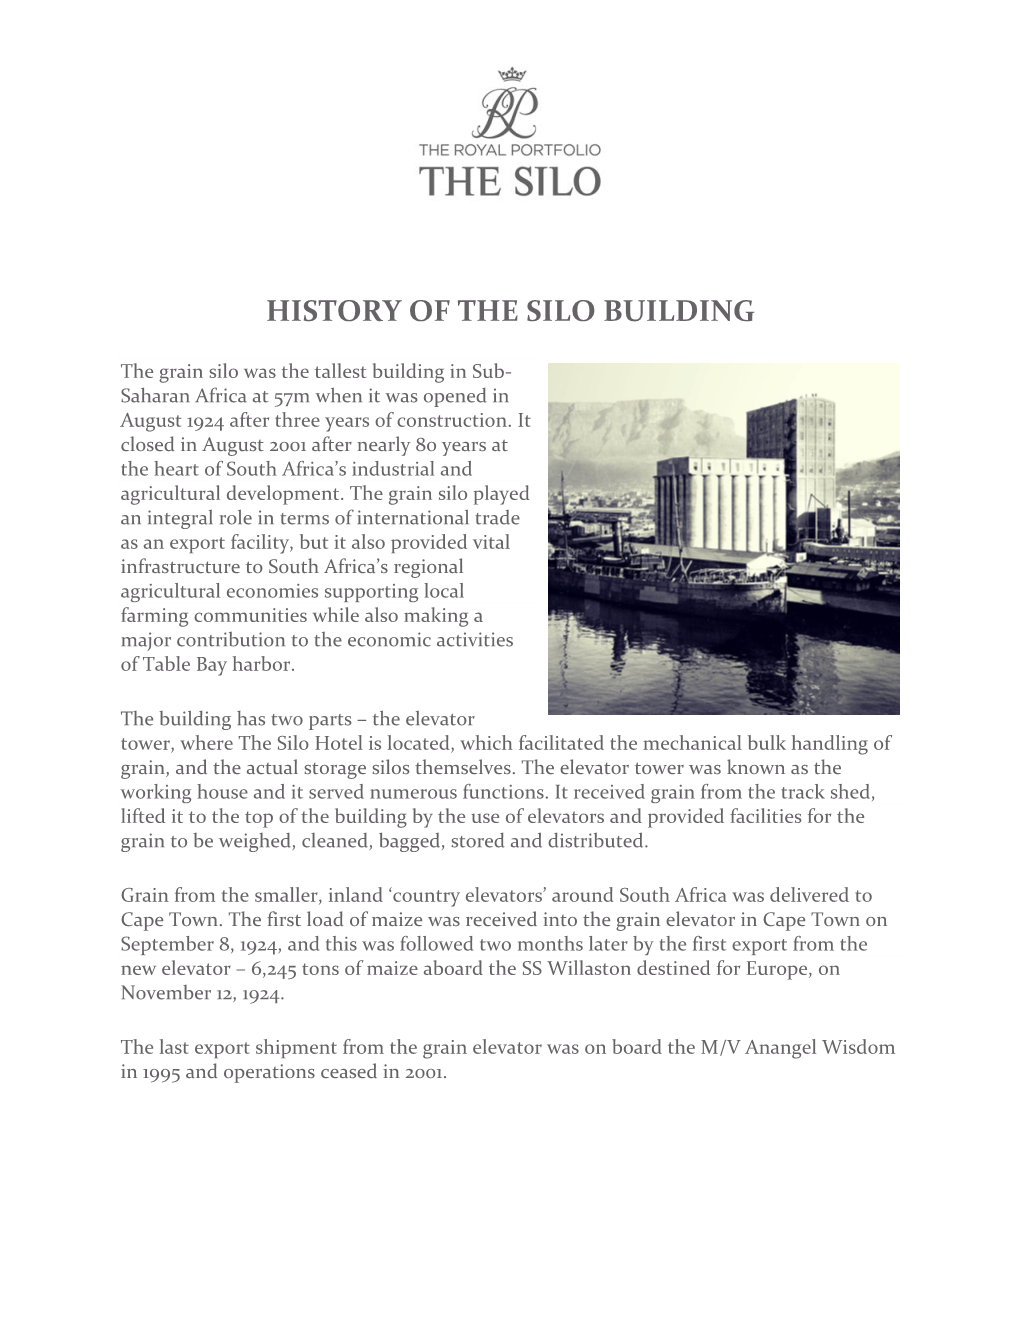 History of the Silo Building